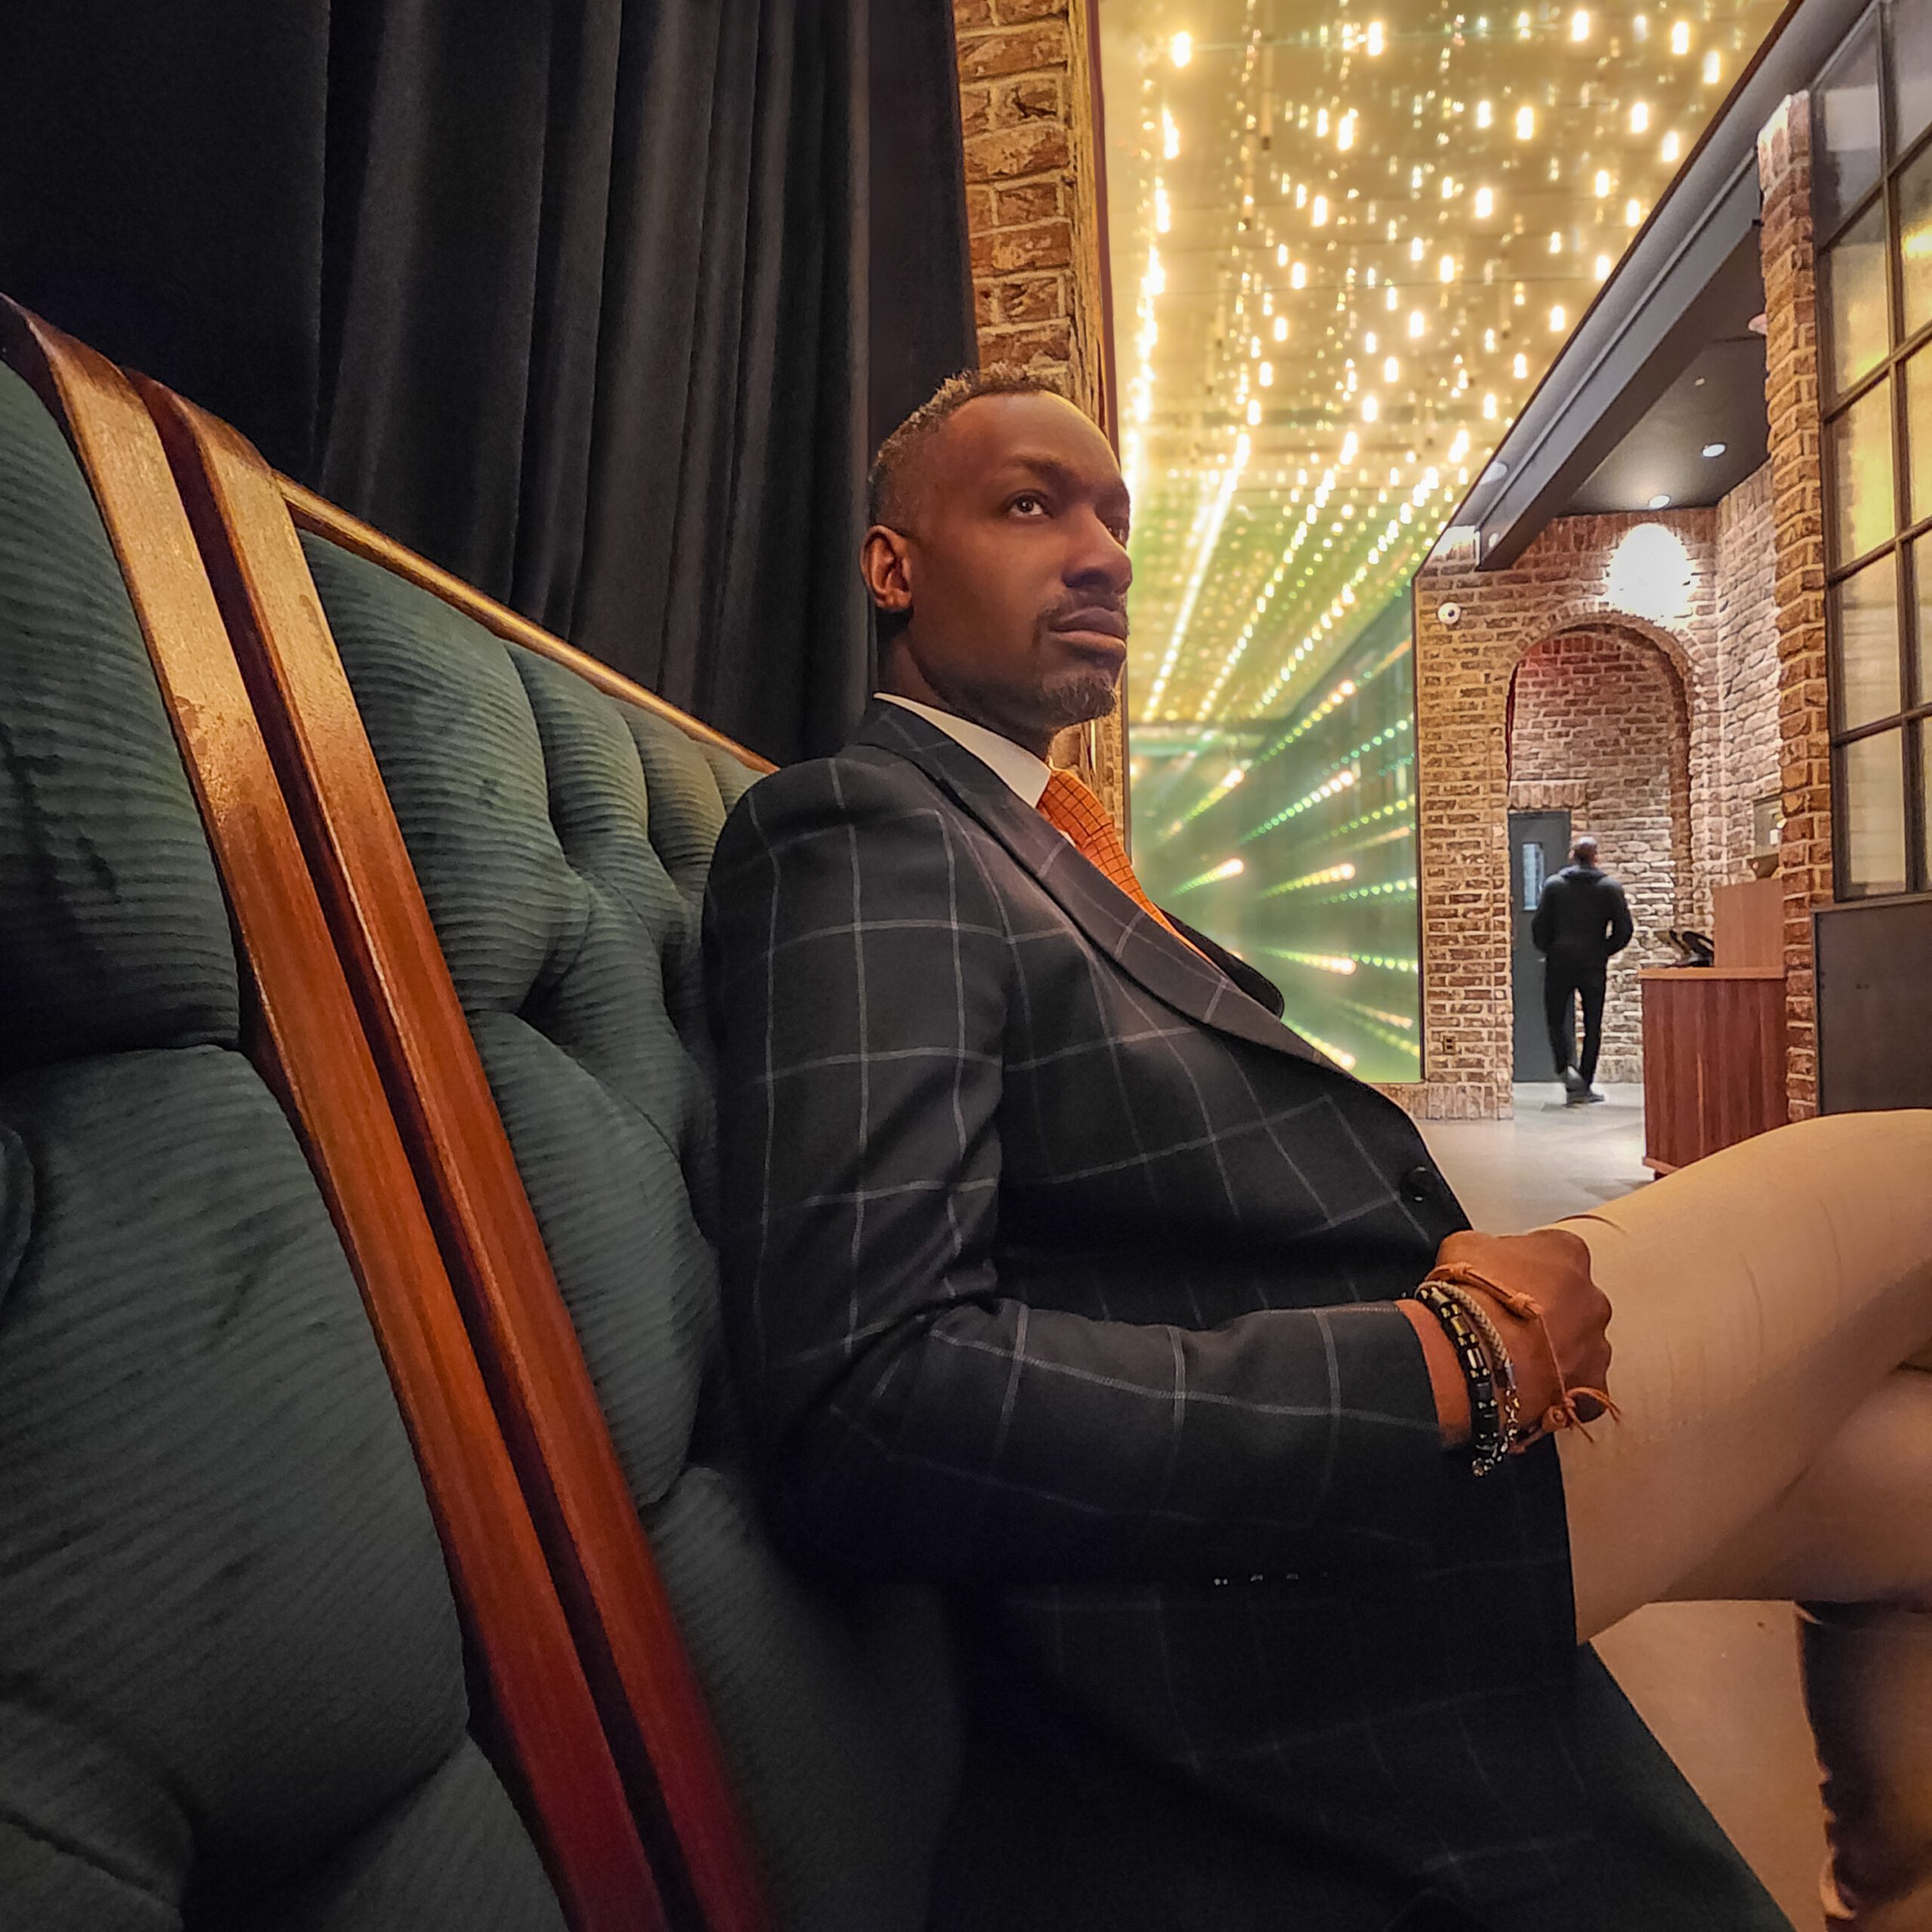 Orator and nightlife curator Arthur J. Rutledge, captured by photographer Vaughn Lowery, prepares to embark on his next endeavor at the Civilian Hotel.

